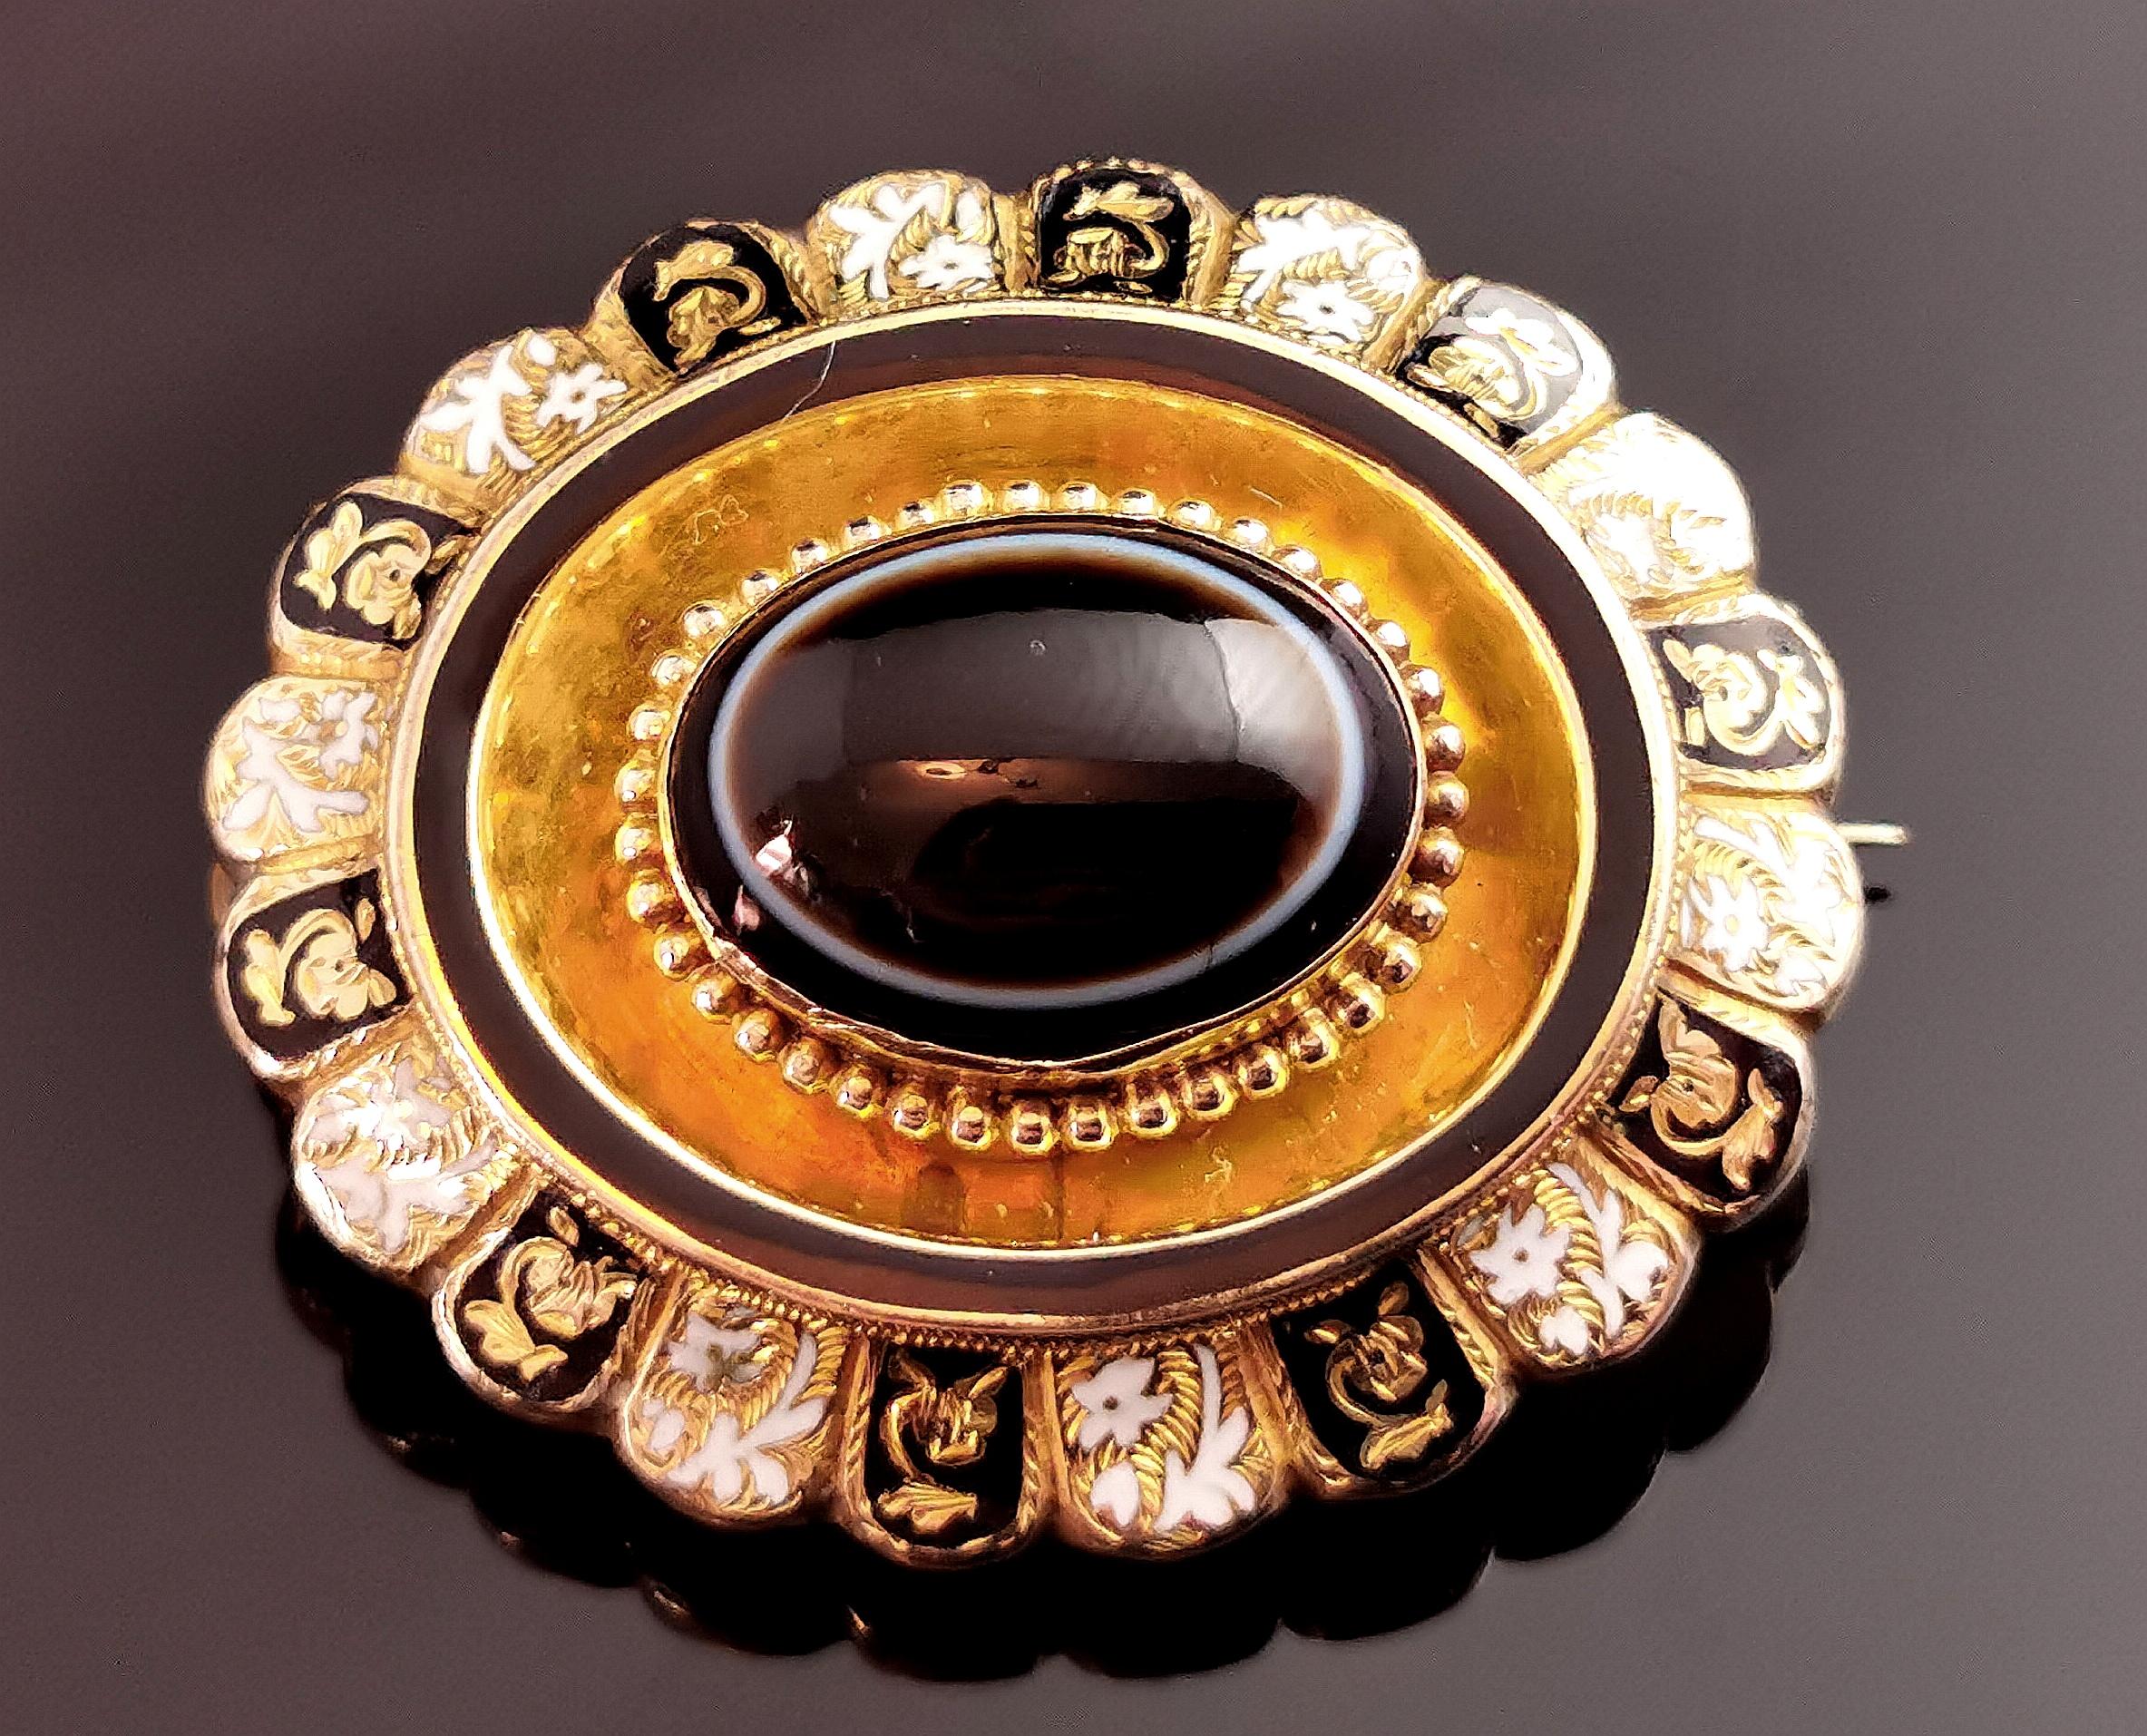 A beautiful, fine antique Victorian mourning brooch.

Crafted in 9kt gold with a rich aged patina and a bloomed gold centre setting, the brooch is an oval shape with beading and engraving.

The centre is set with a chunky banded agate cabochon, a